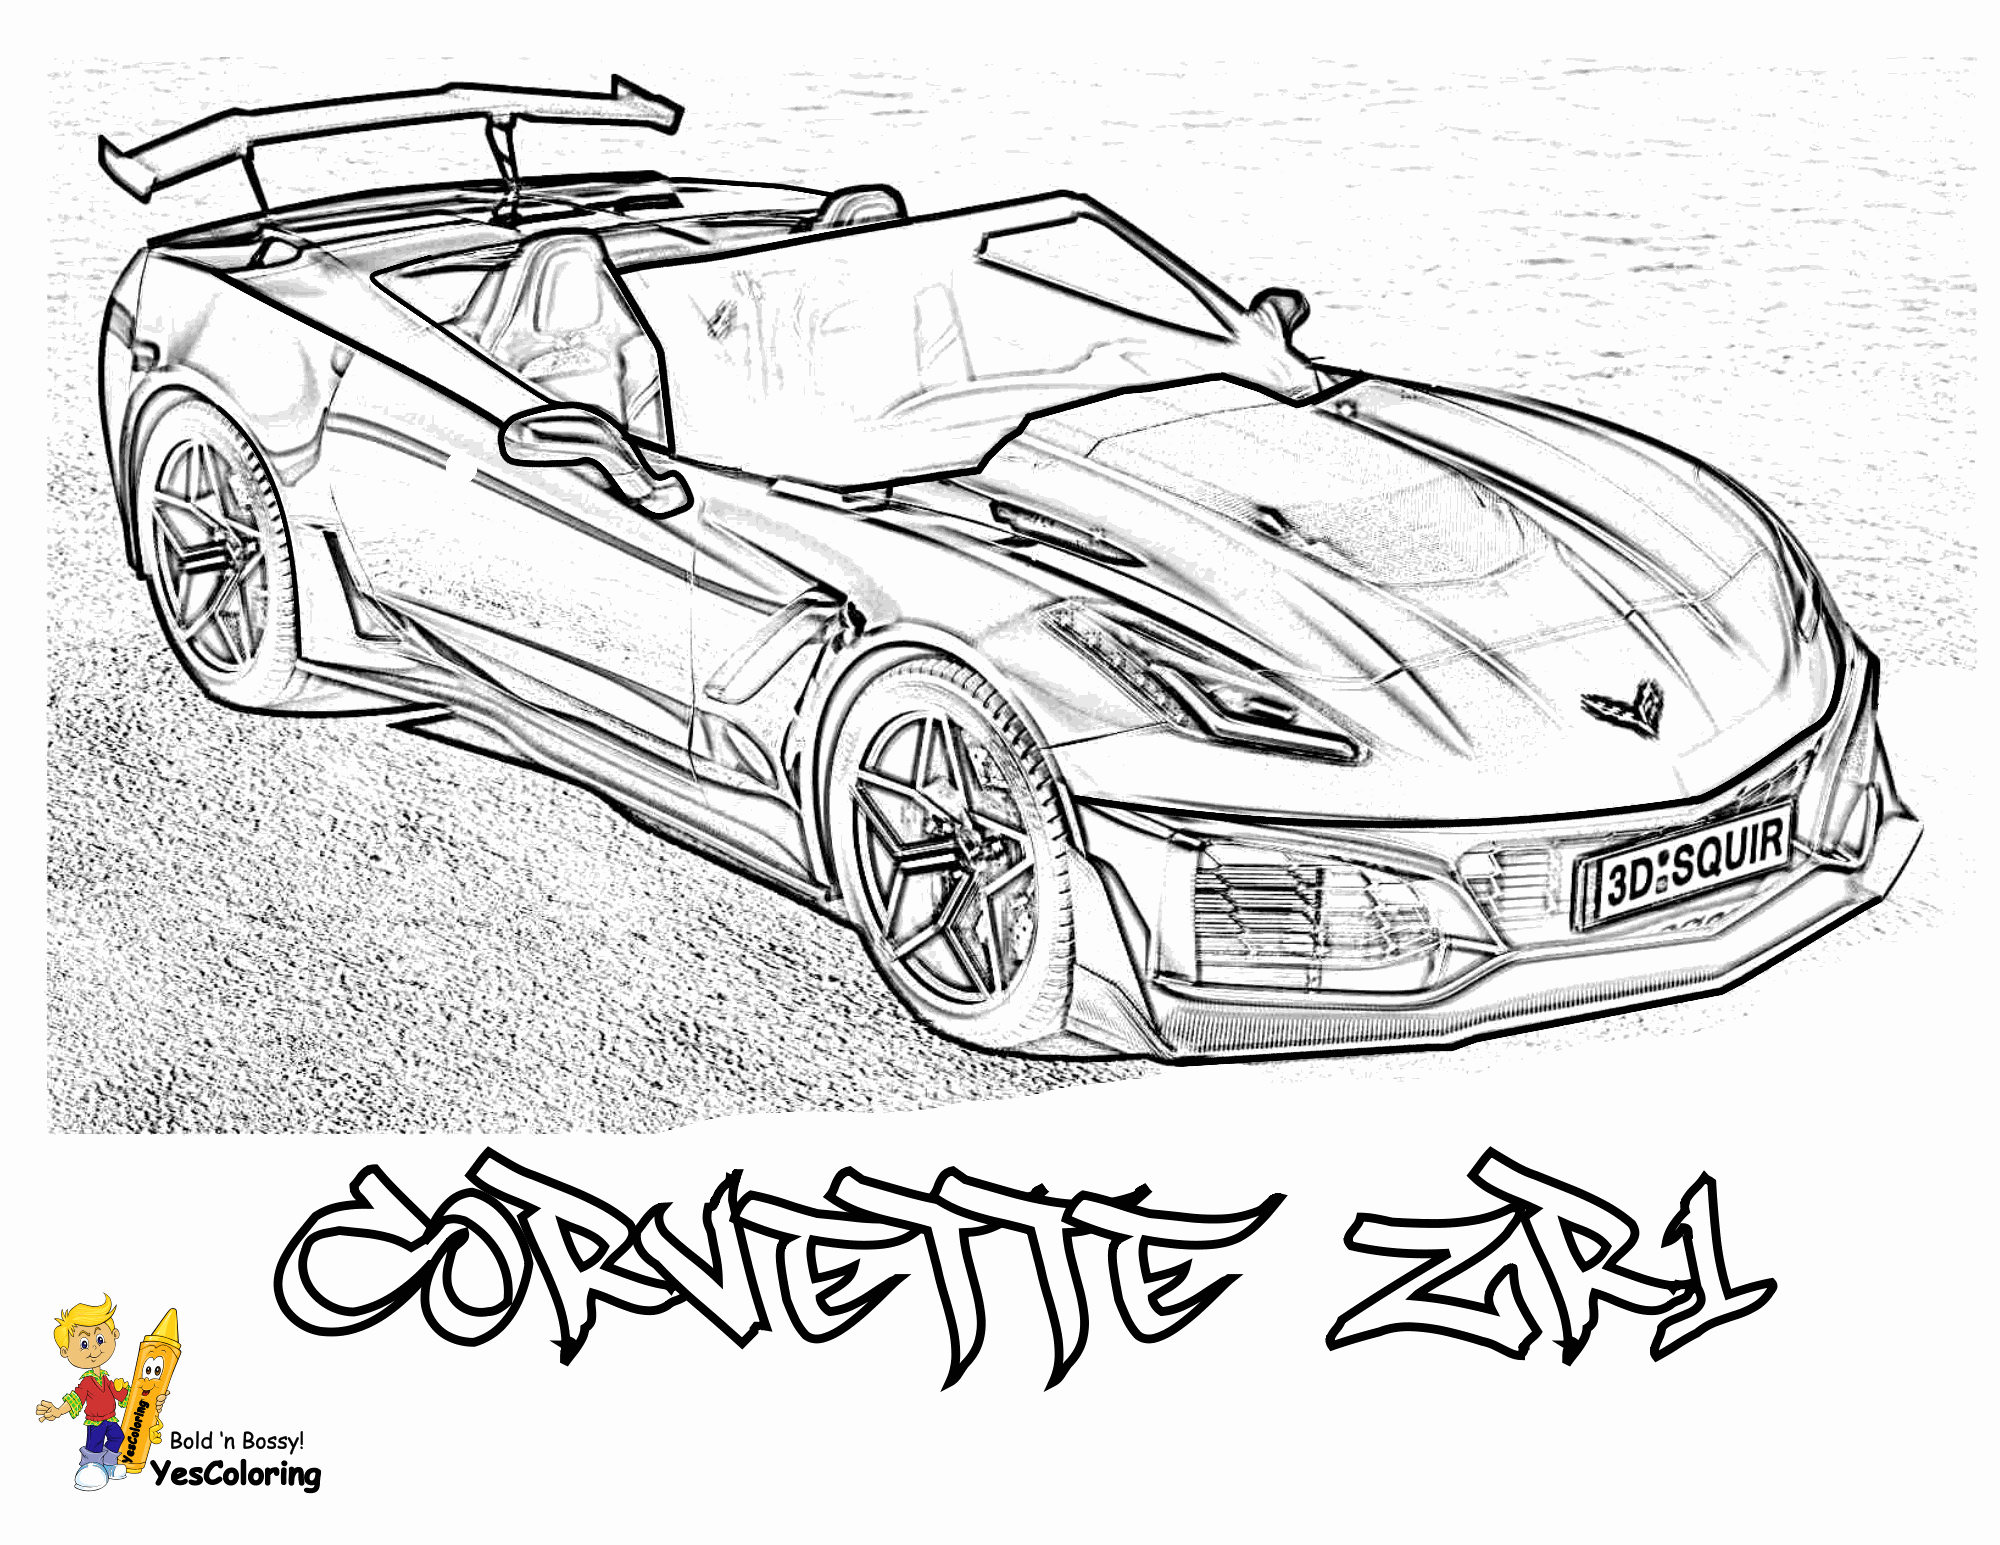 corvette coloring pages red blooded car coloring pages free corvettes cameros pages coloring corvette 